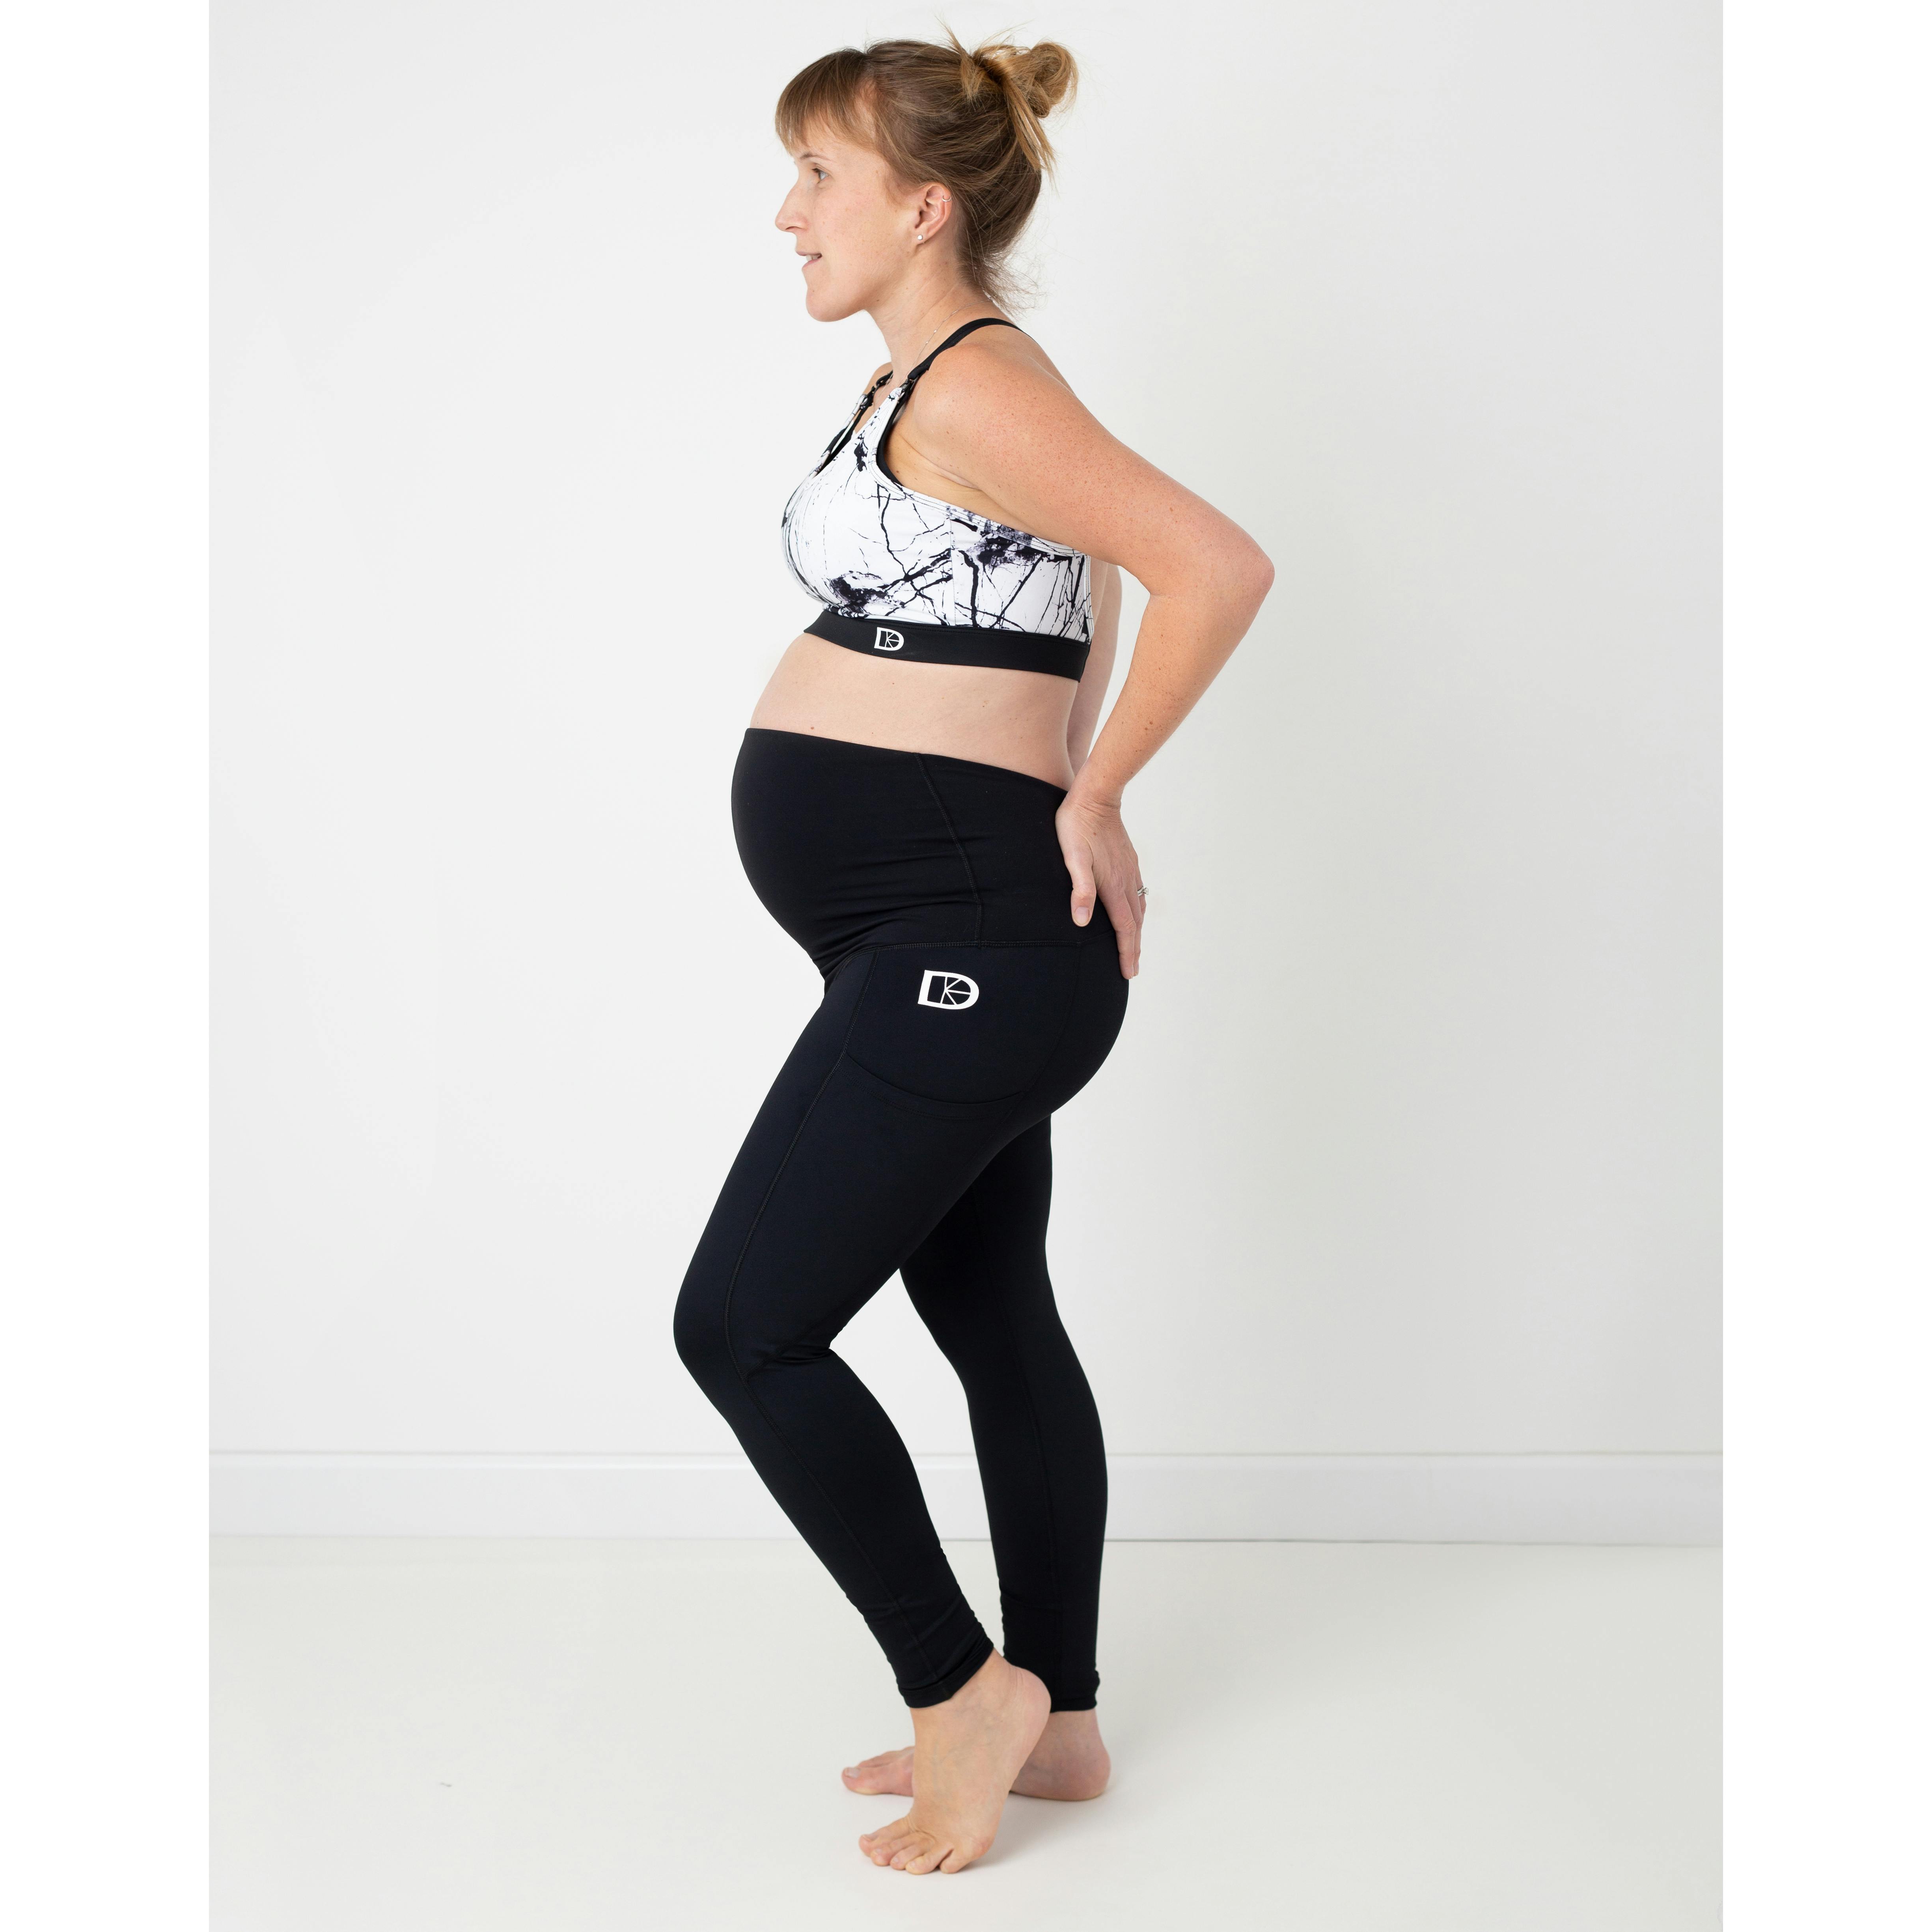 Can I Wear Tight Clothes While Pregnant  Trimester Fashion